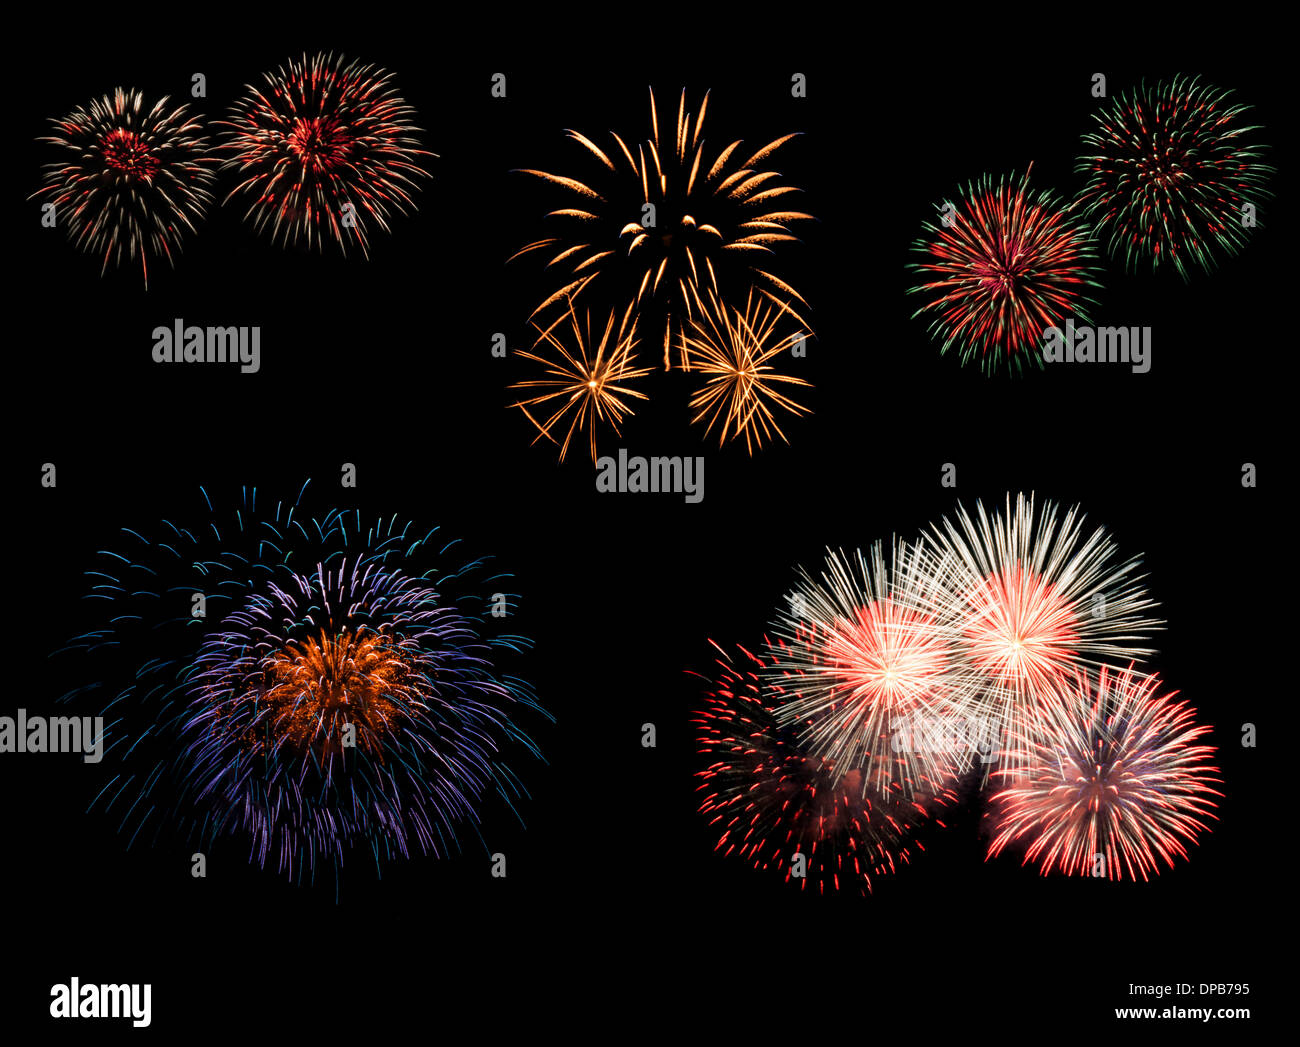 Collection of Colorful Fireworks on Black Background Stock Photo